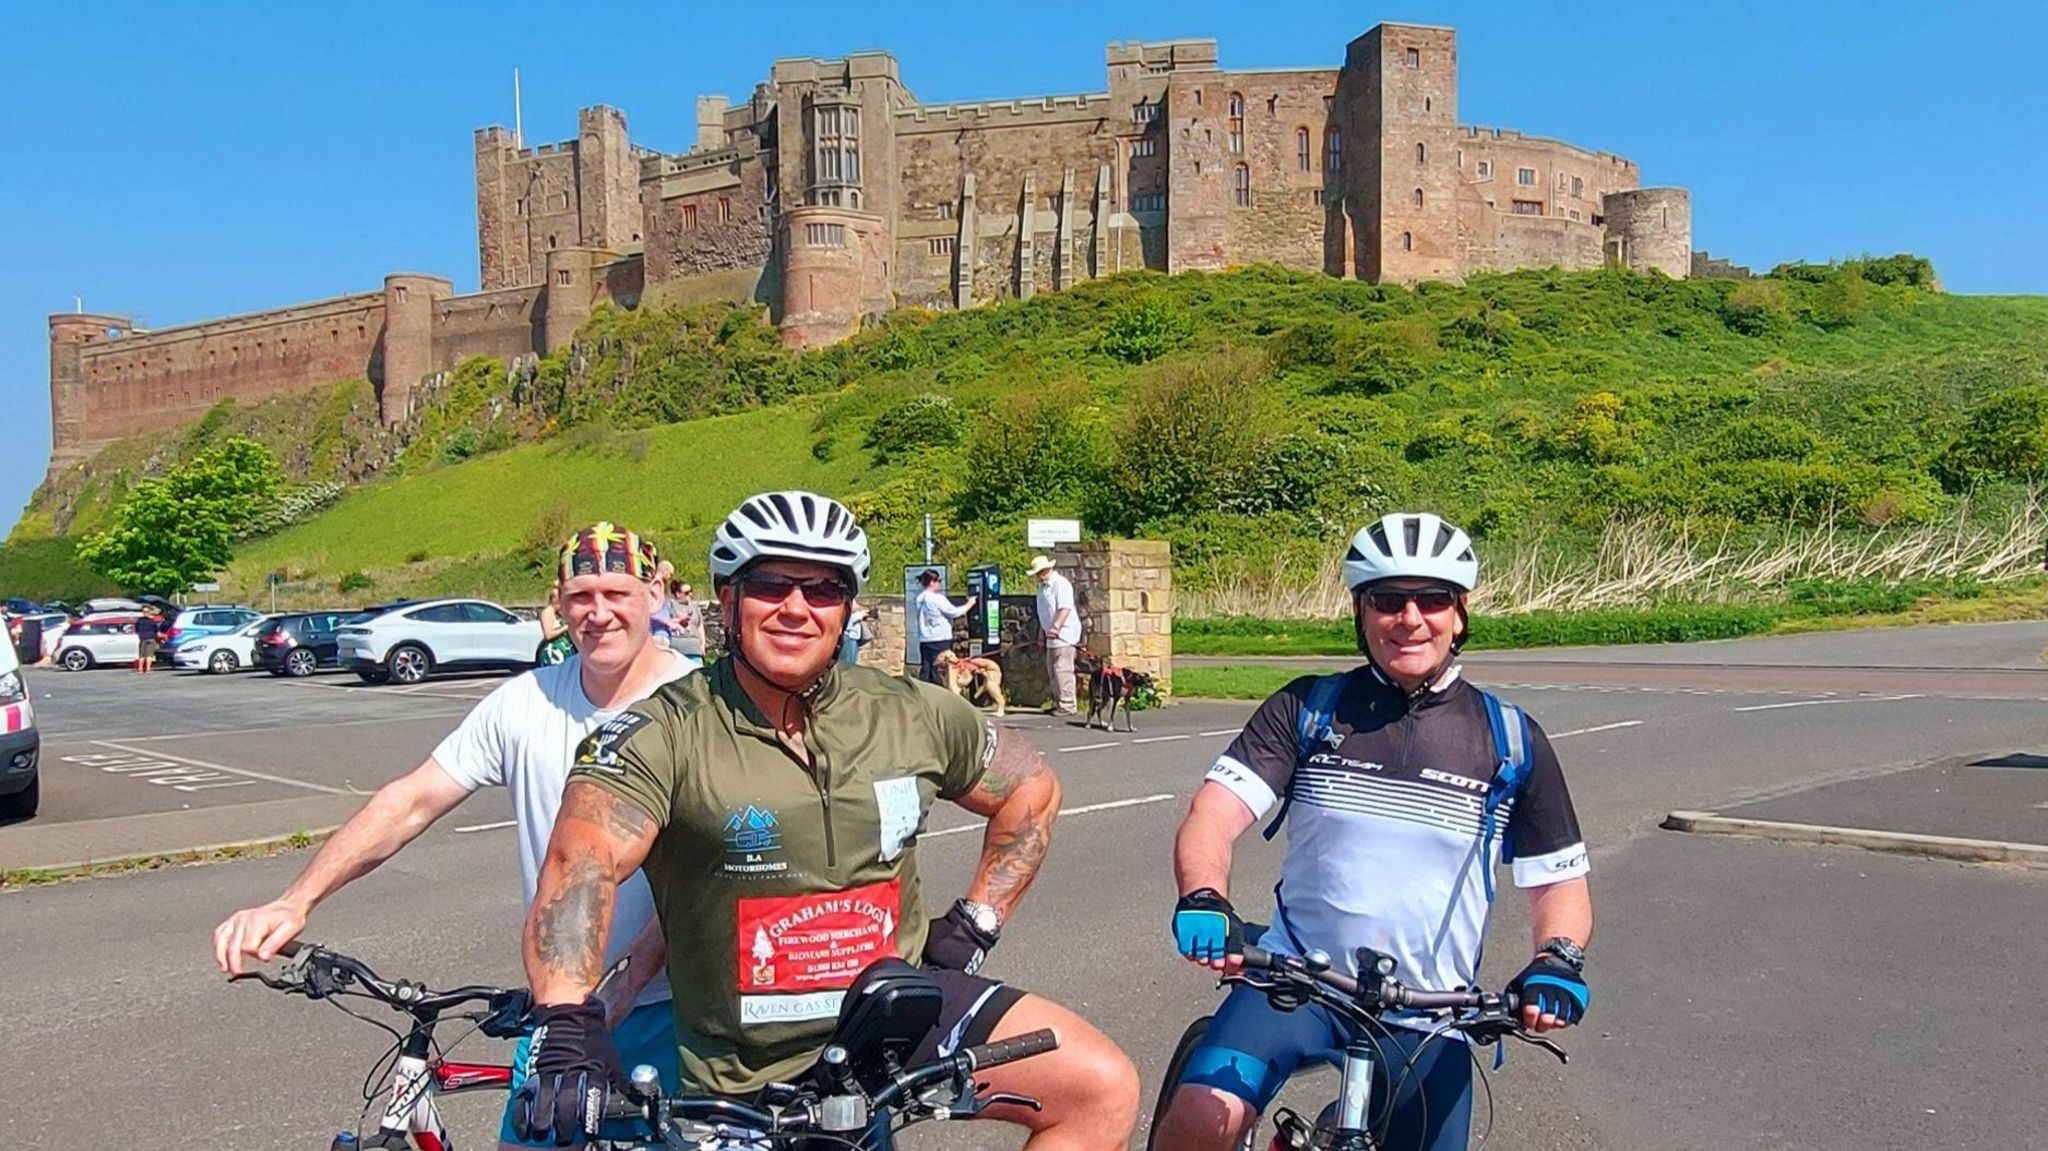 Jamie Bell (centre) and friends, Angus Intini and Steve Charlton, posing on their bikes in front of Bamburgh Castle, Northumberland